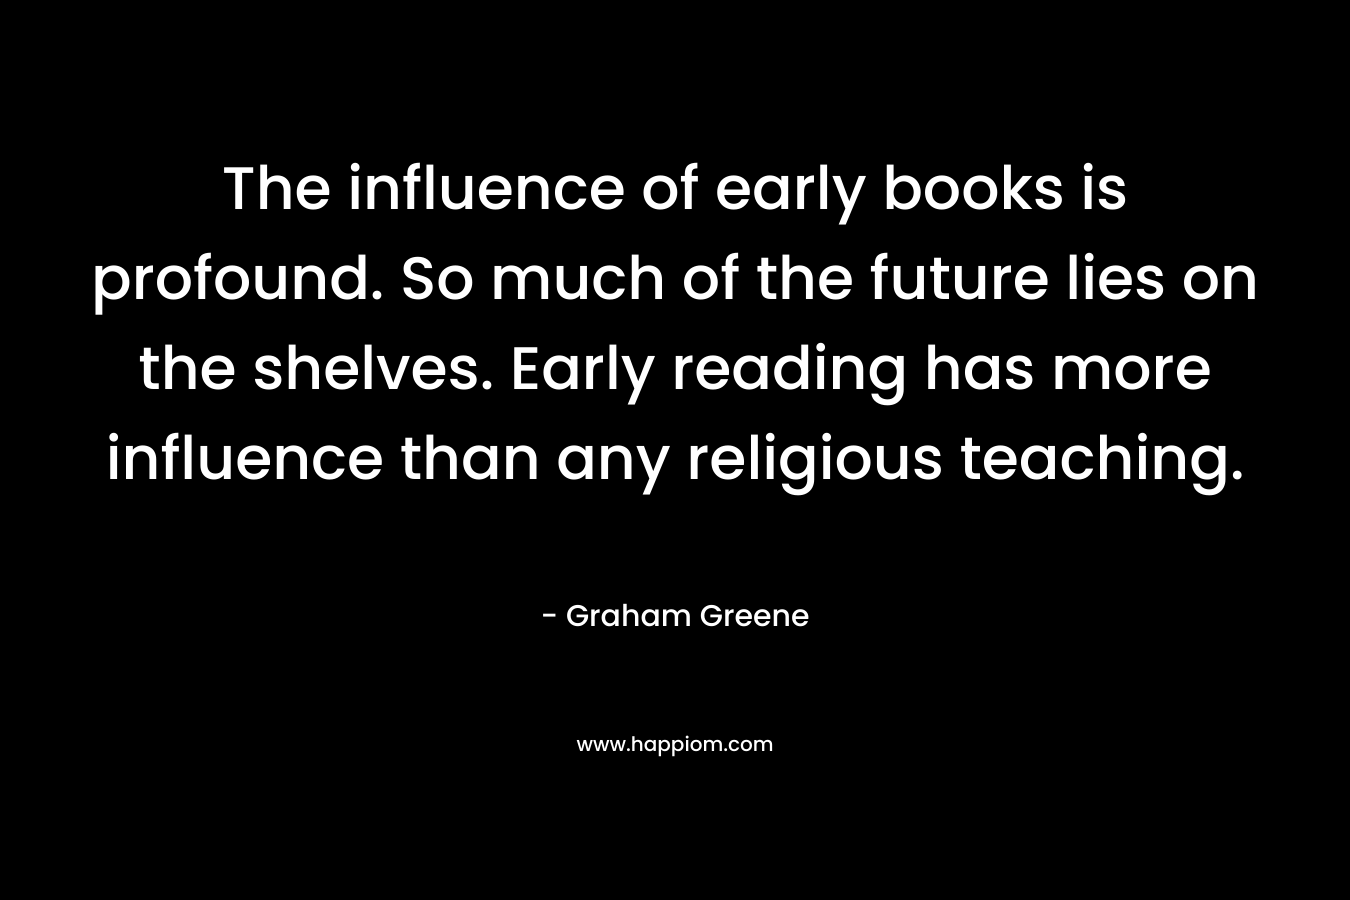 The influence of early books is profound. So much of the future lies on the shelves. Early reading has more influence than any religious teaching.